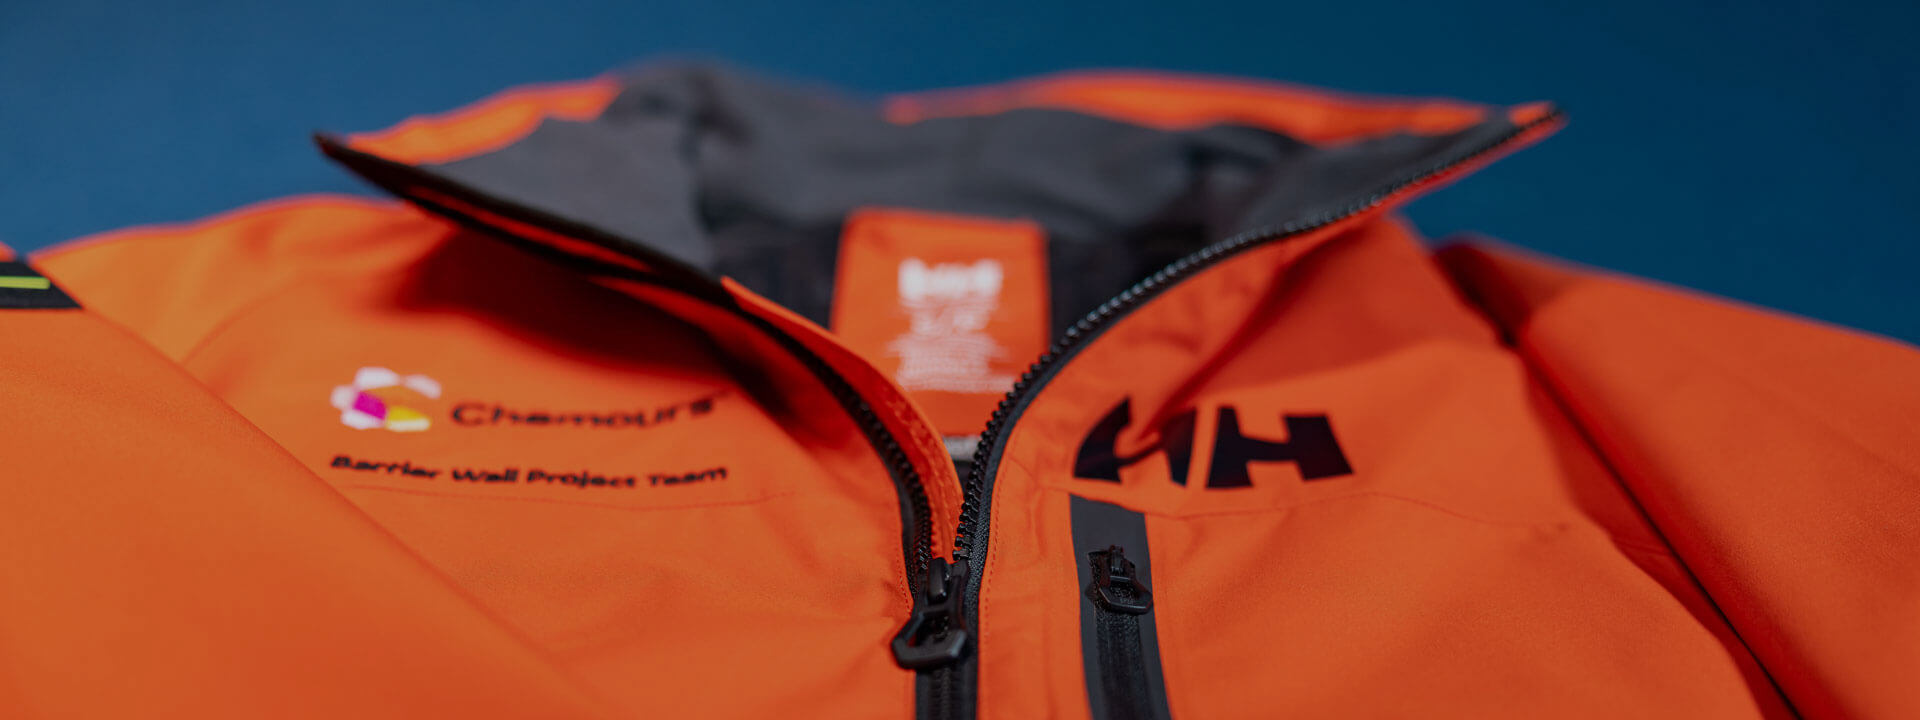 Custom Helly Hansen Jackets and Workwear. World Class Style. Explore Custom Embroidered Apparel.